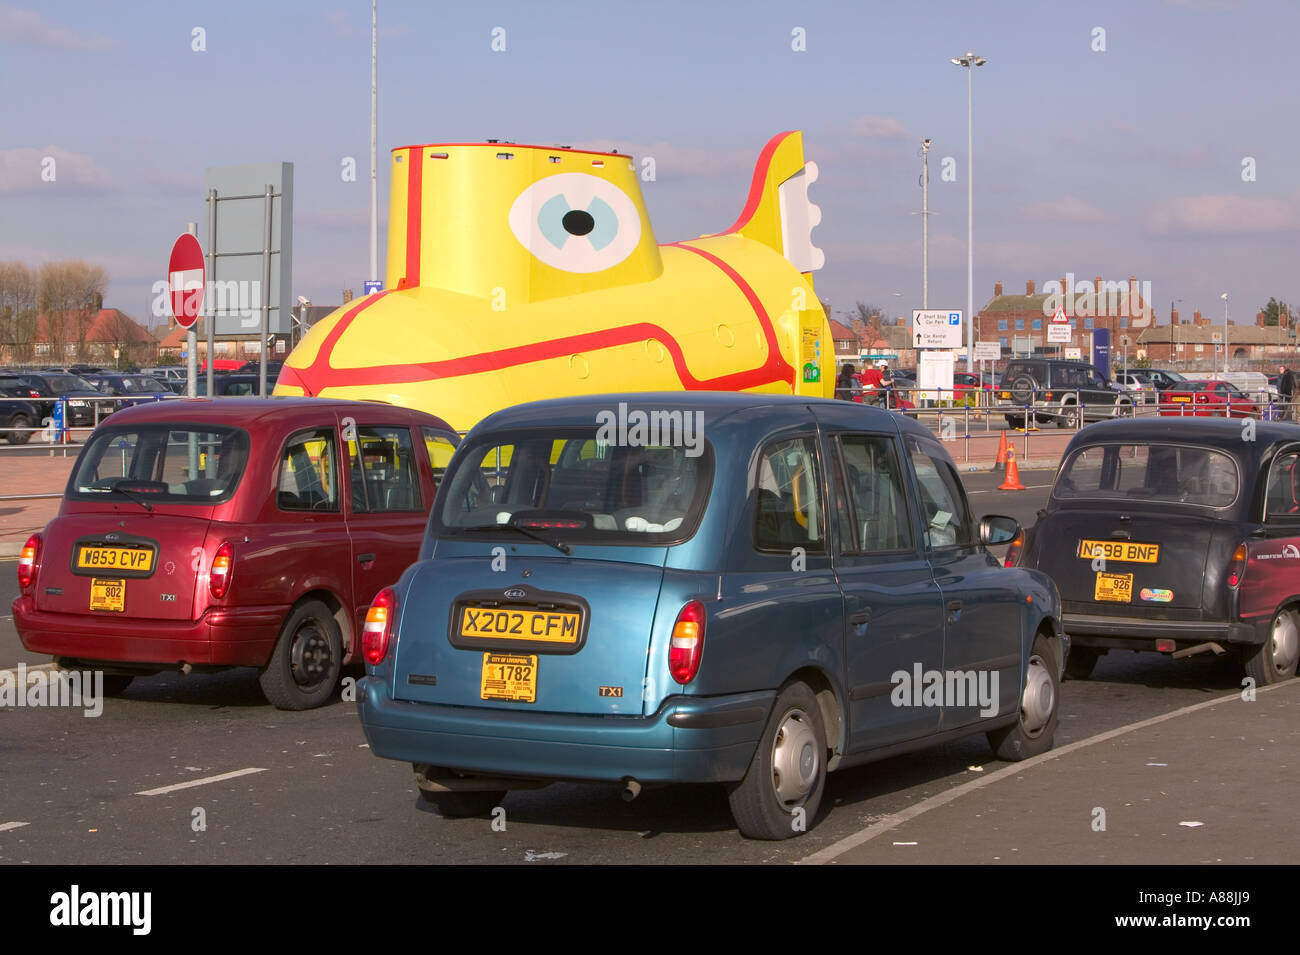 a sculpture of the Beatles Yellow submarine at the Liverpool john lennon airport, liverpool, England Stock Photo